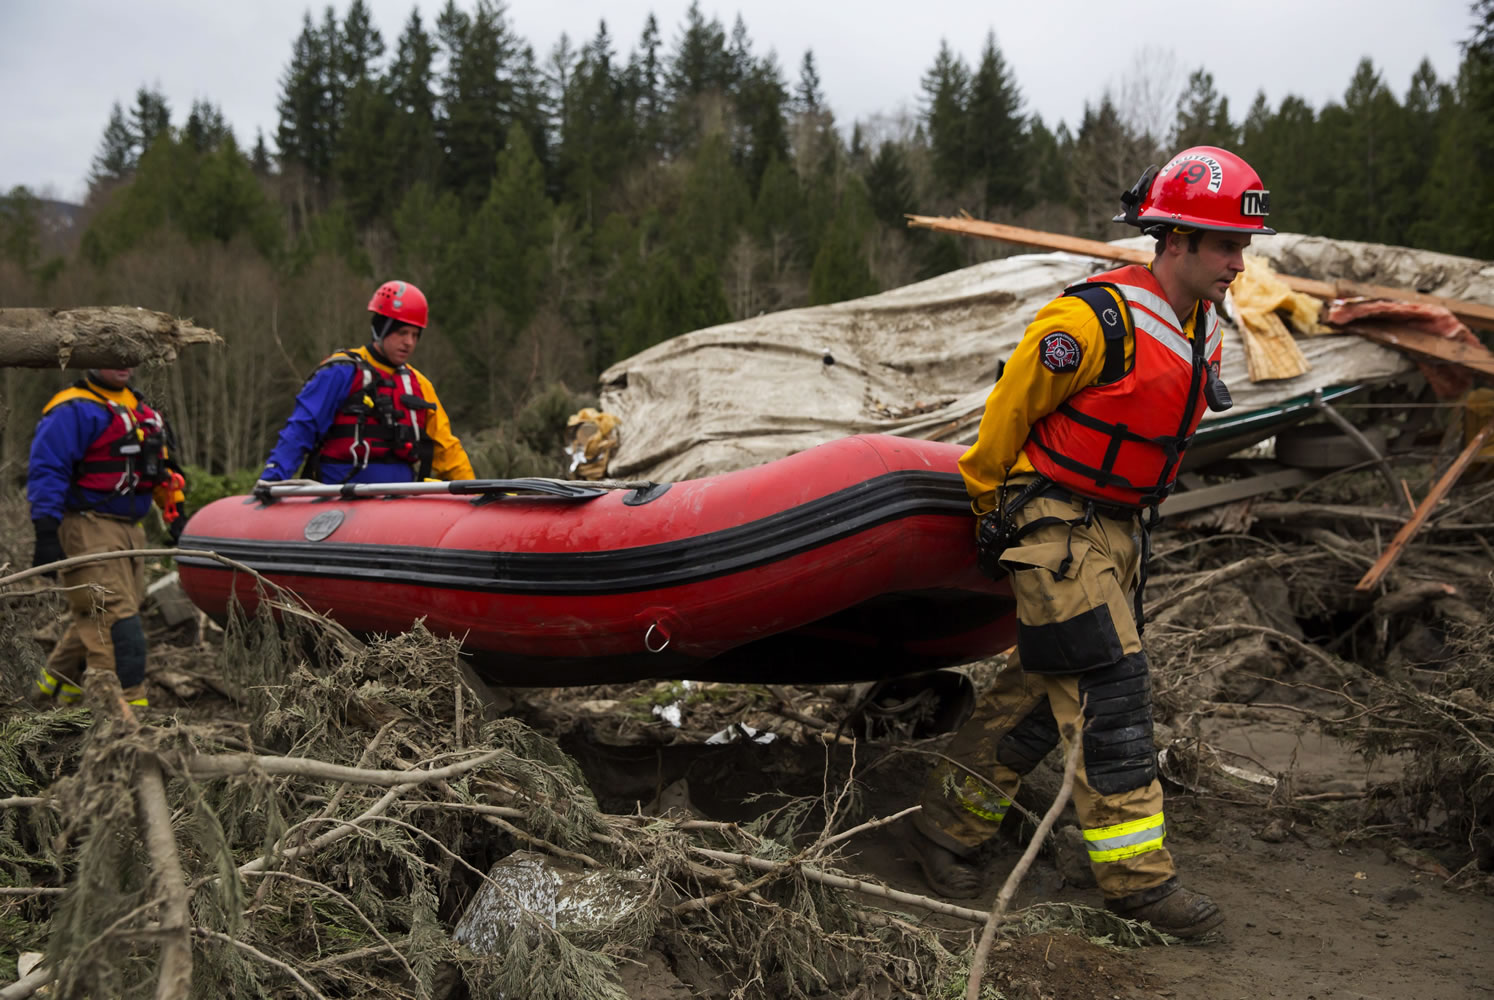 Rescue workers carry an inflatable boat to the flooded area in the debris field caused by the massive mudslide above the North Fork of the Stillaguamish River onto Highway 530, as recovery efforts continue, near Oso on Tuesday.